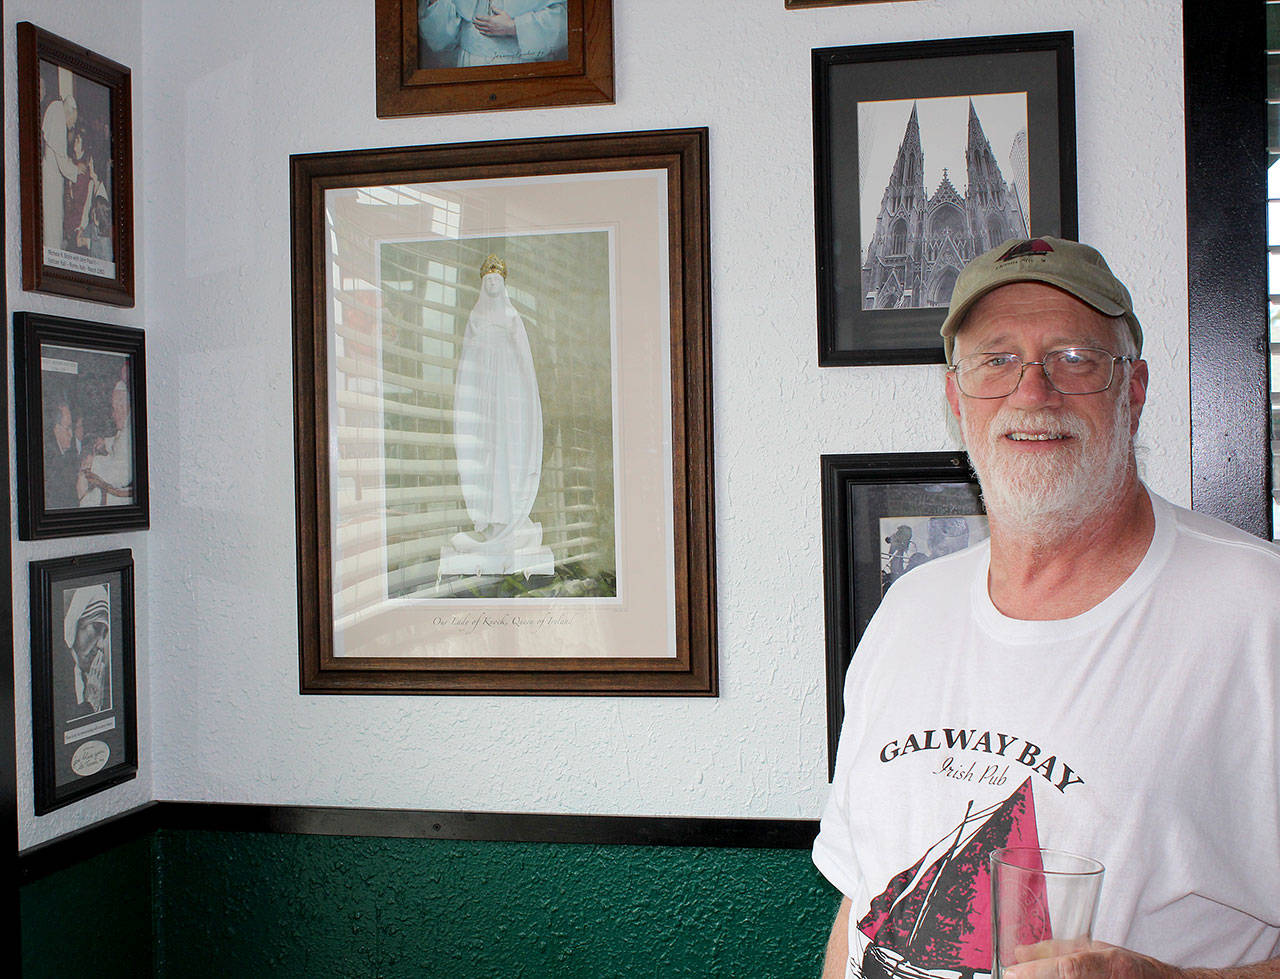 ABOVE: Galway Bay Irish Pub owner Liam Gibbons asks: “Who has an autographed picture of a saint in their banquet room?” Among his collection of papal portraits and other Catholic artifacts, he points to a signed photo of Mother Teresa (at bottom left).                                RIGHT: Sports memorabilia of all things Irish are displayed in the game room at Galway Bay.